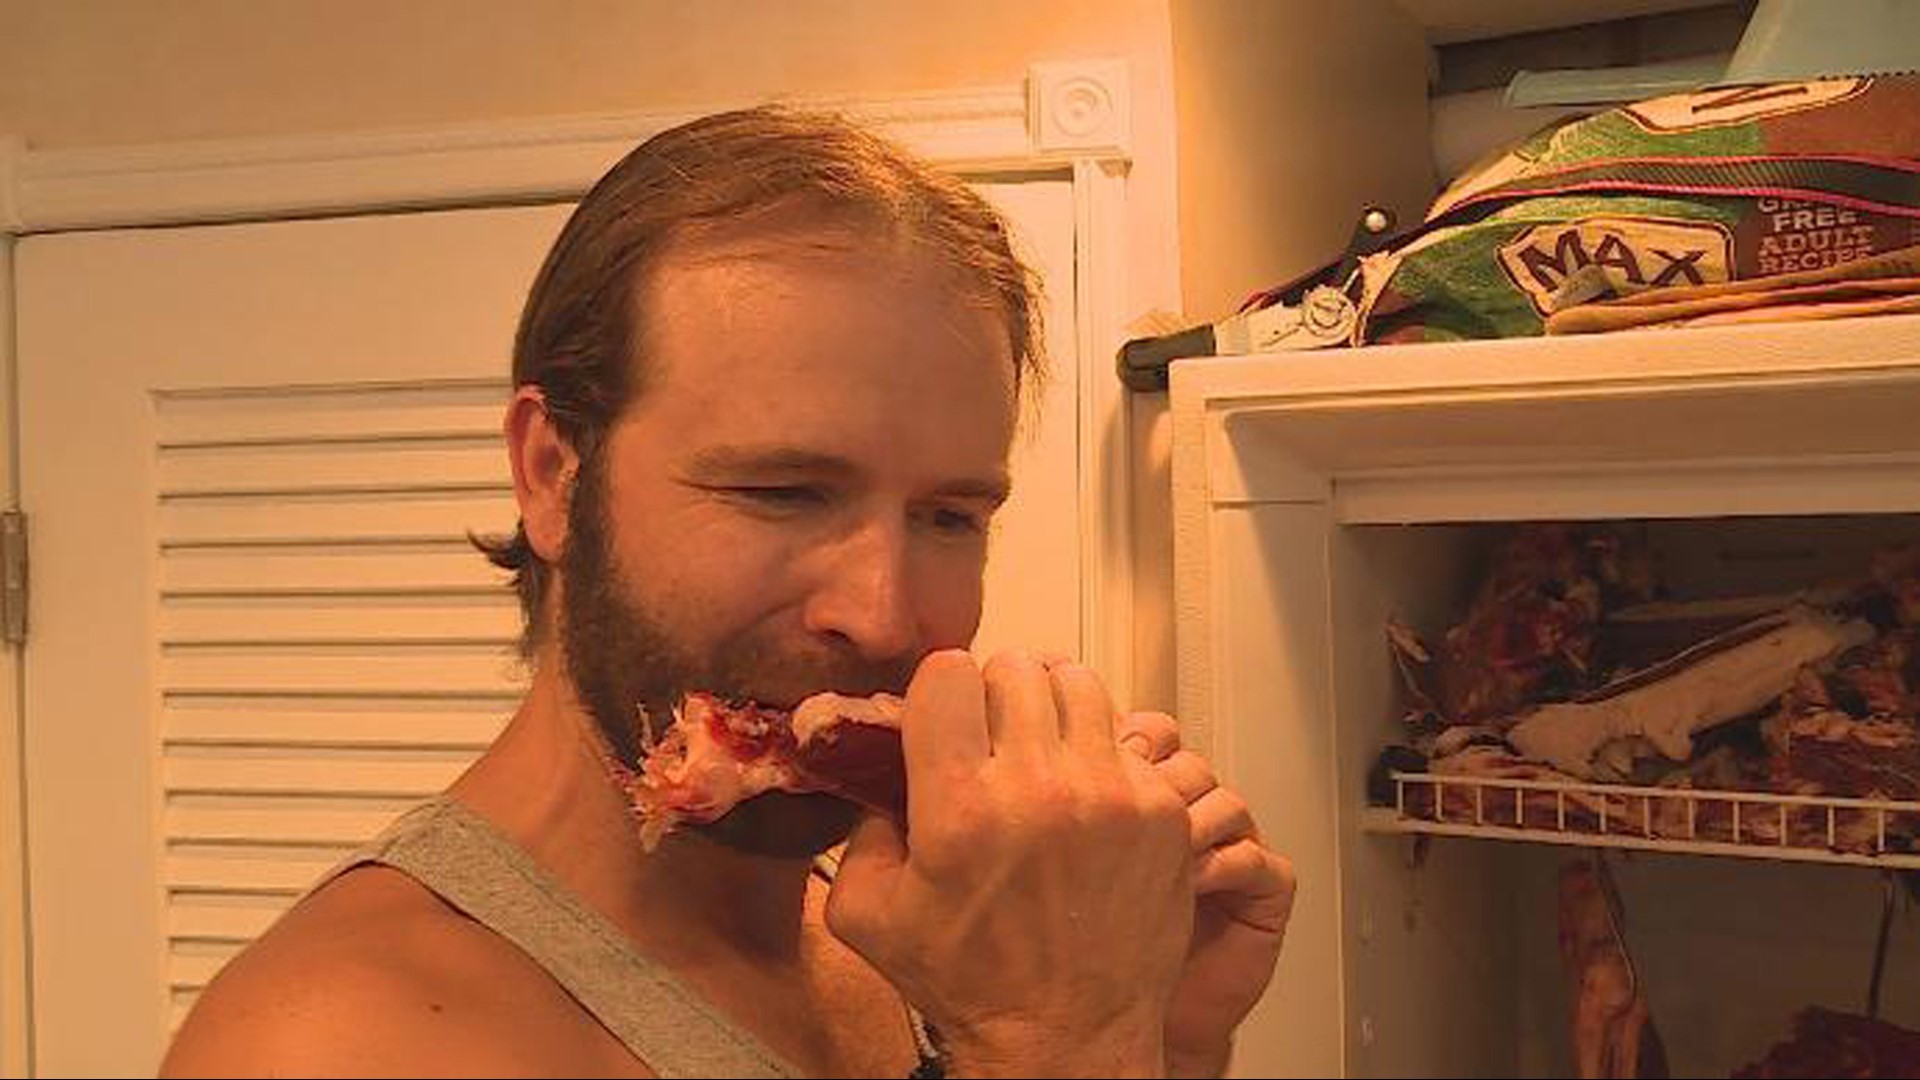 Derek Nance says raw meat provides more vitamins and nutrients than when it is cooked, and his diet has solved his health problems.